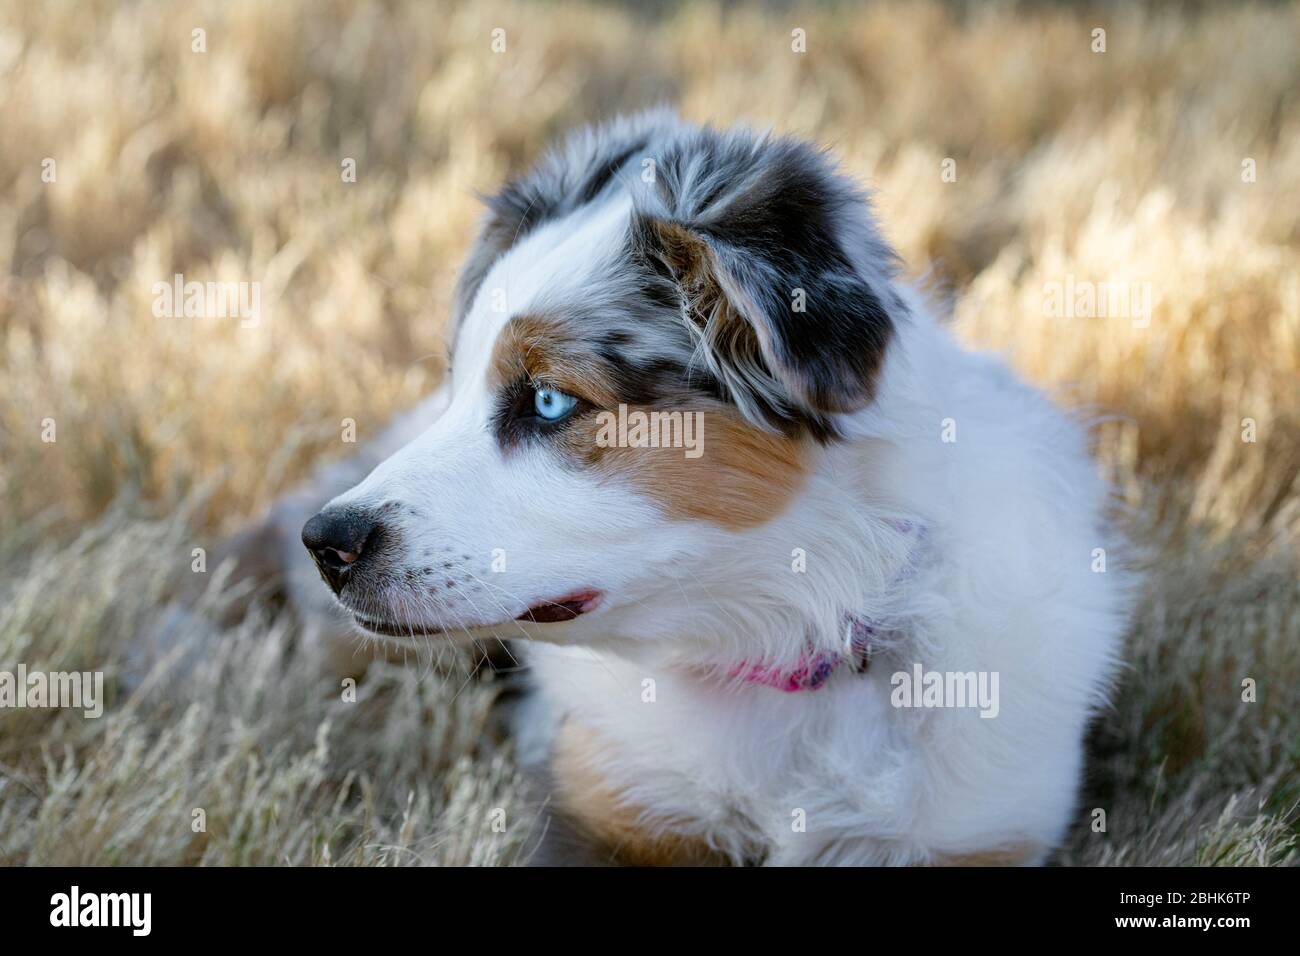 Adorable Australian Shepherd puppy laying in the grass. Stock Photo